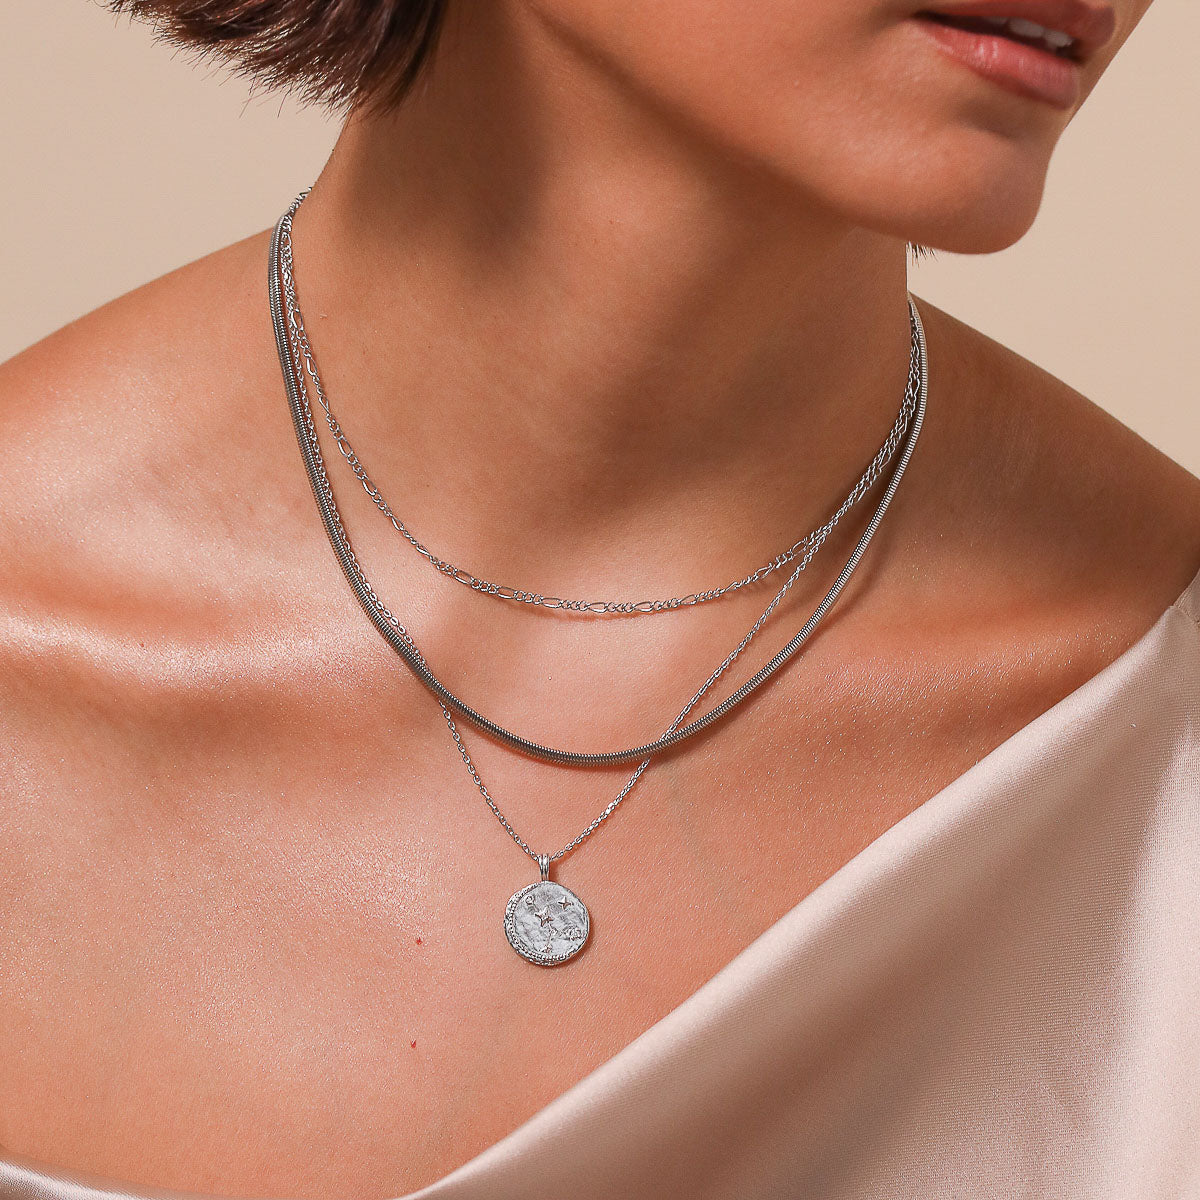 Cancer Zodiac Pendant Necklace in Silver worn layered with necklaces